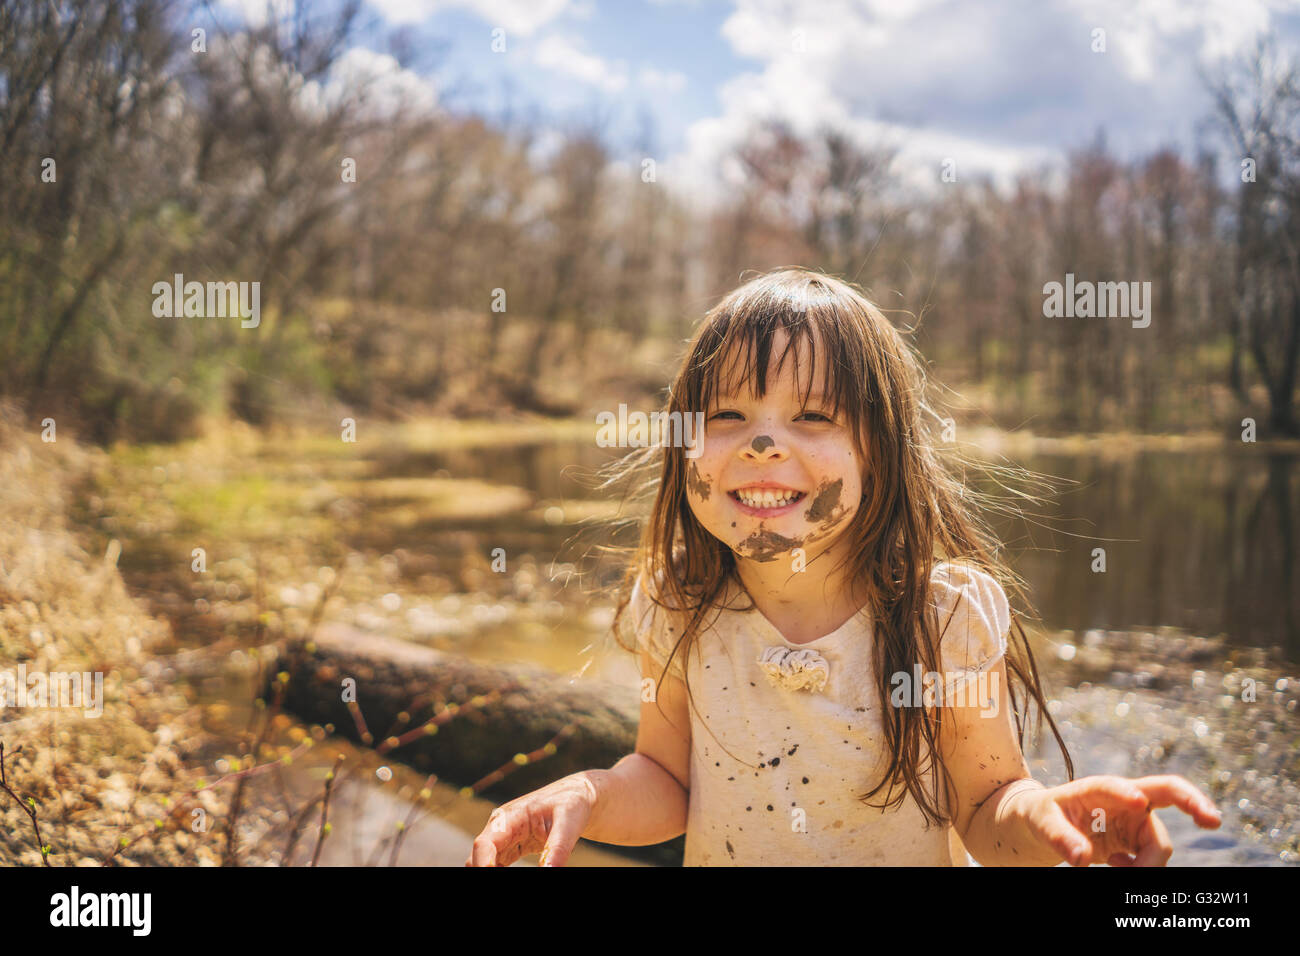 Portrait of a Girl with mud on her face laughing, USA Stock Photo